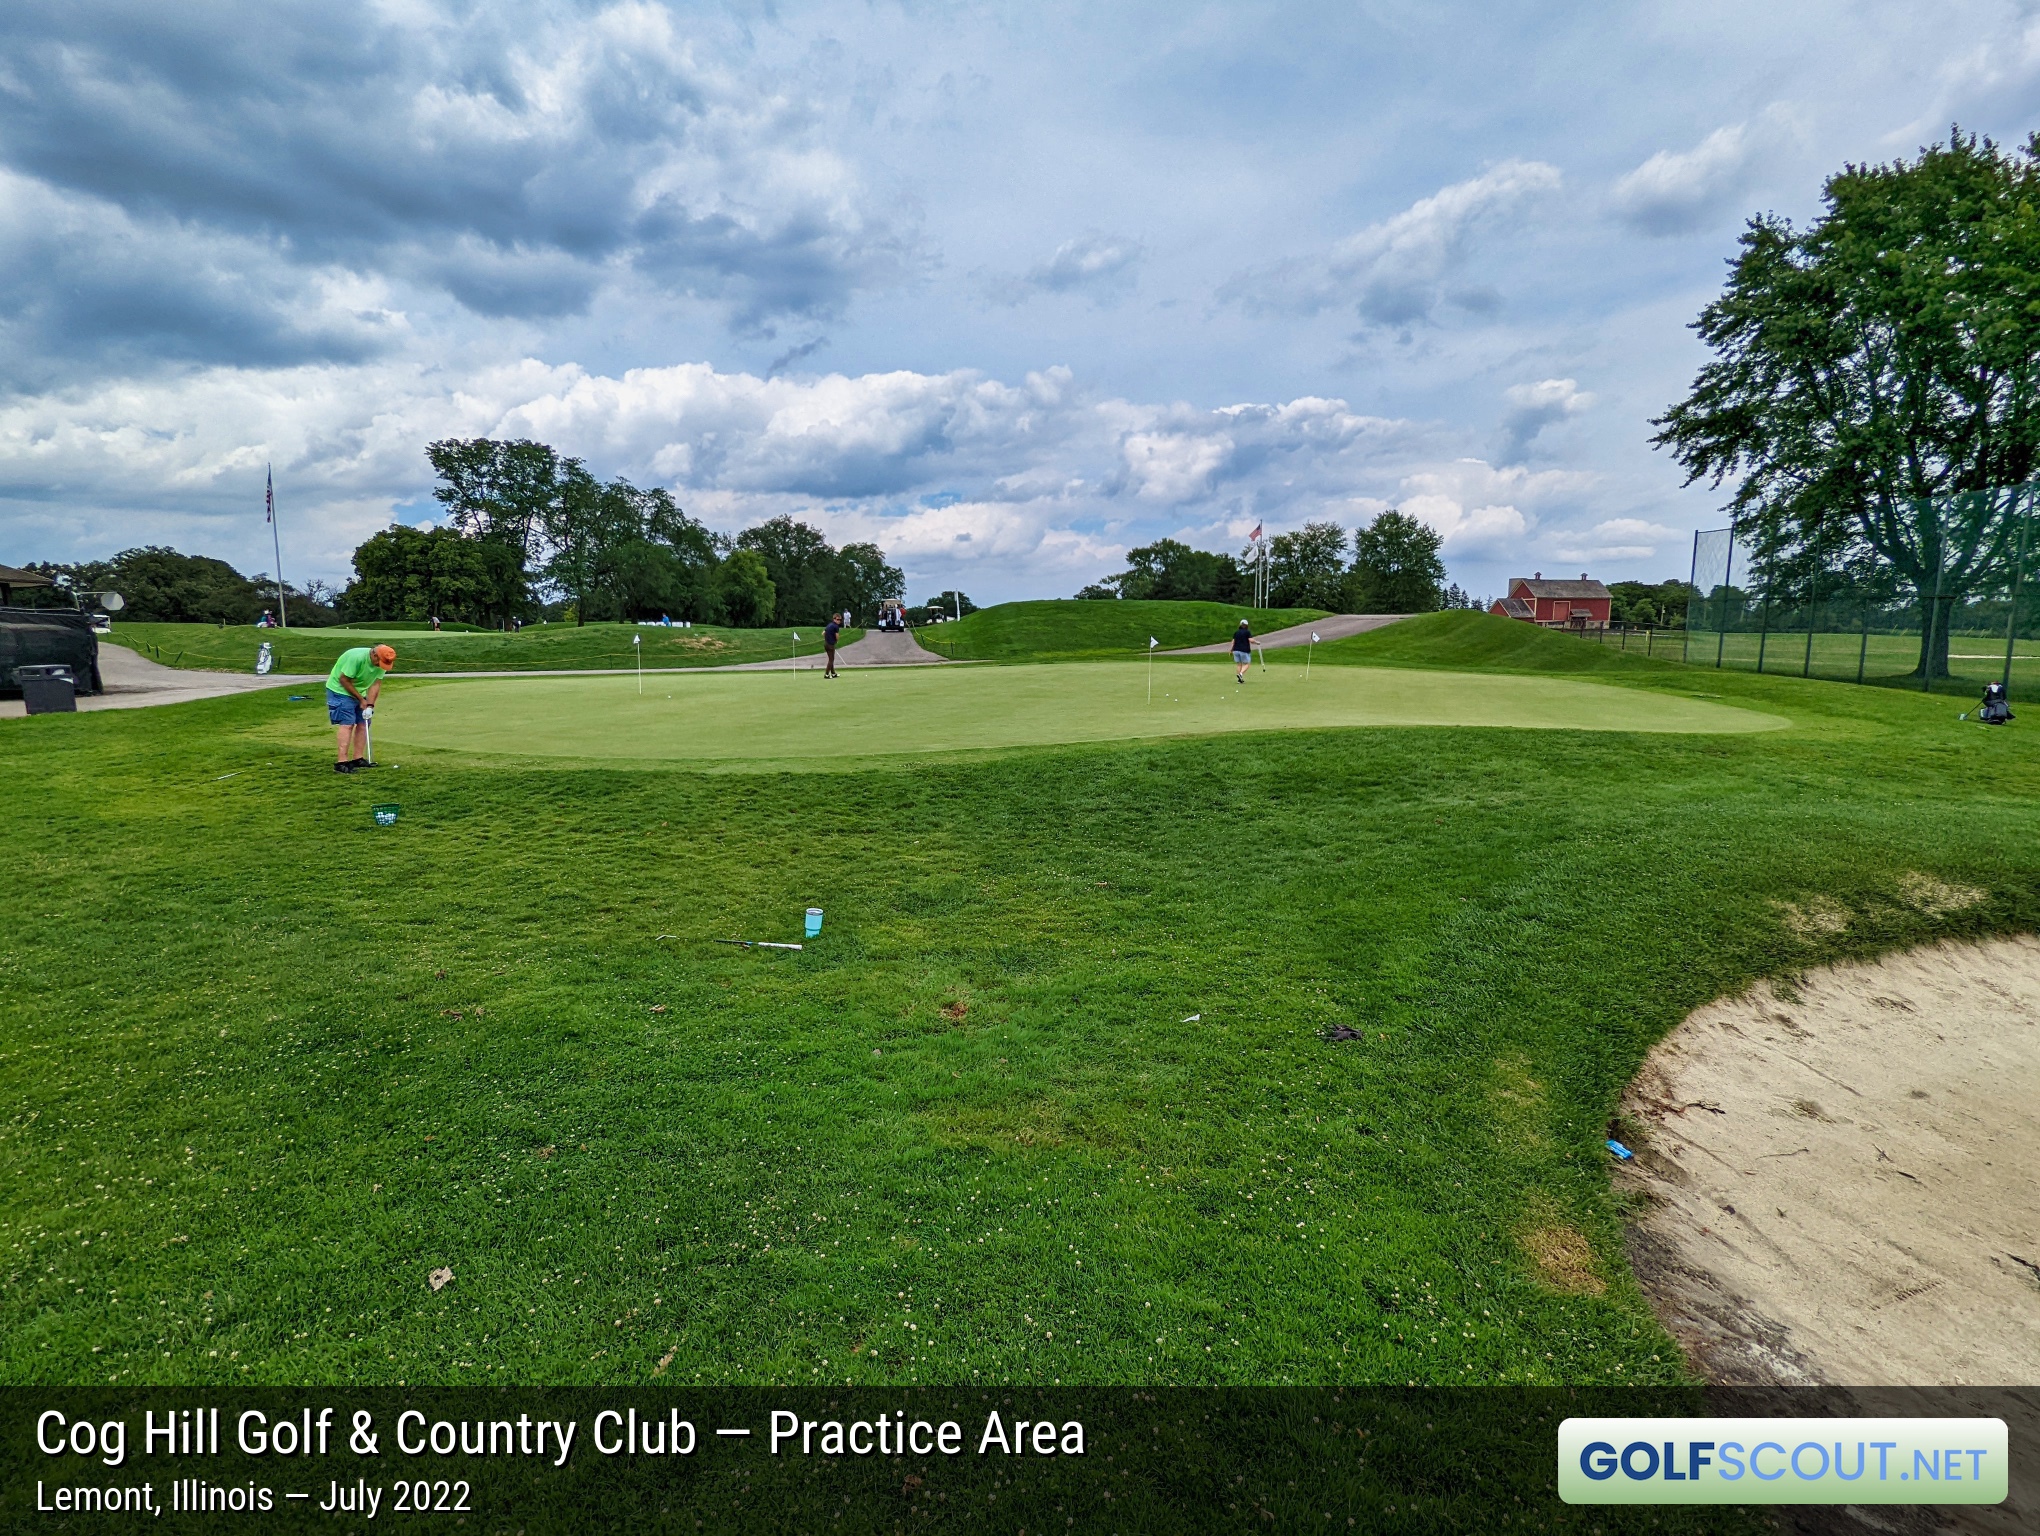 Photo of the practice area at Cog Hill Course #3 in Lemont, Illinois. 